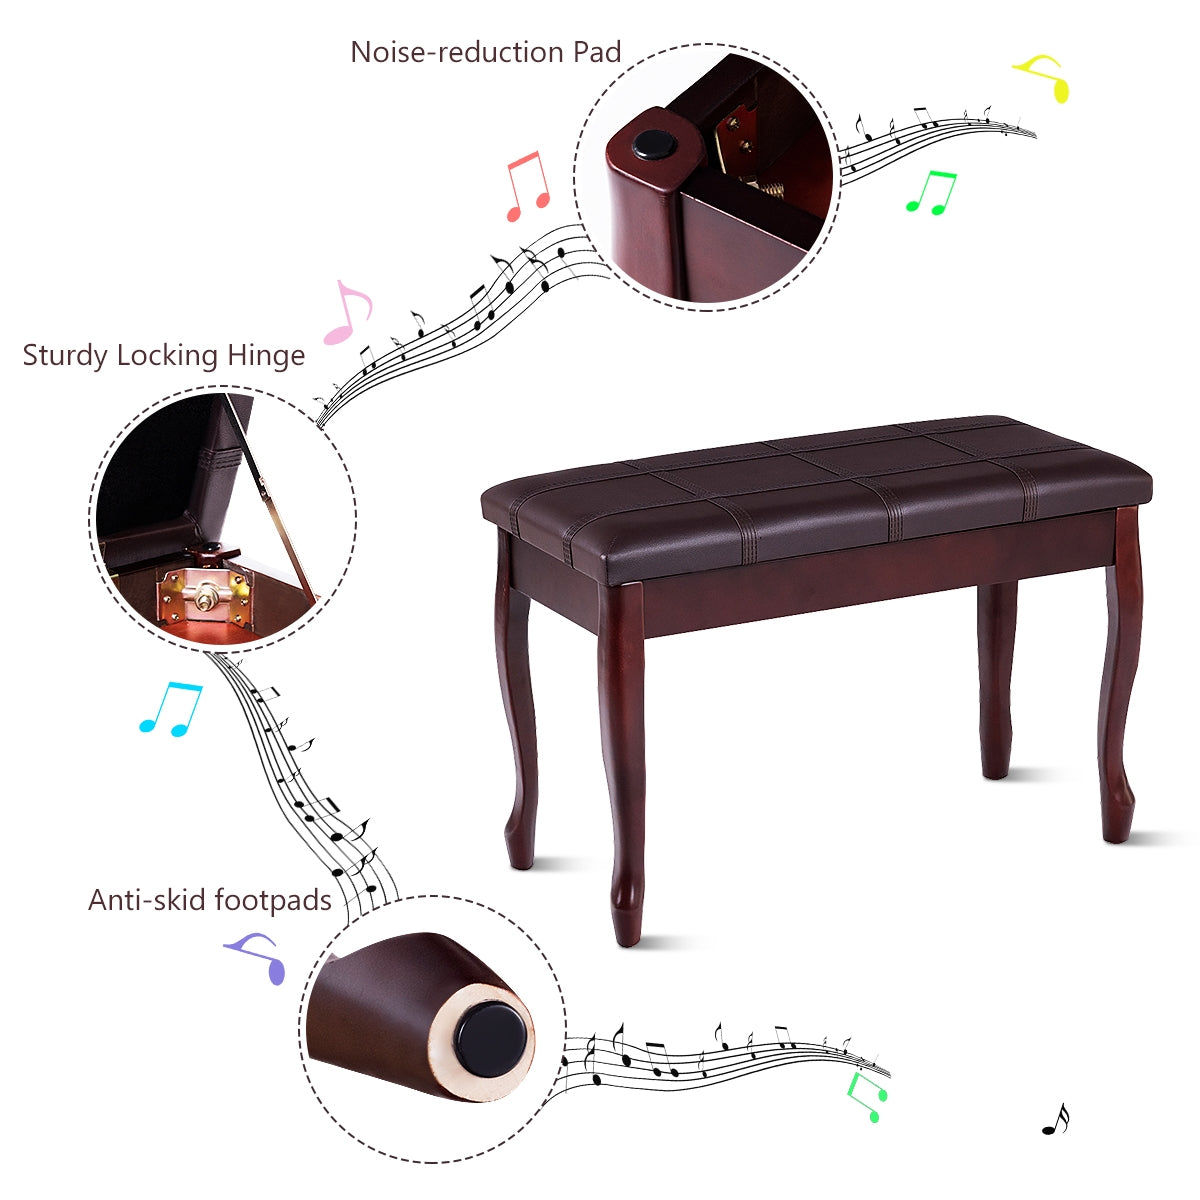 Solid Wood PU Leather Piano Bench with Storage-Brown